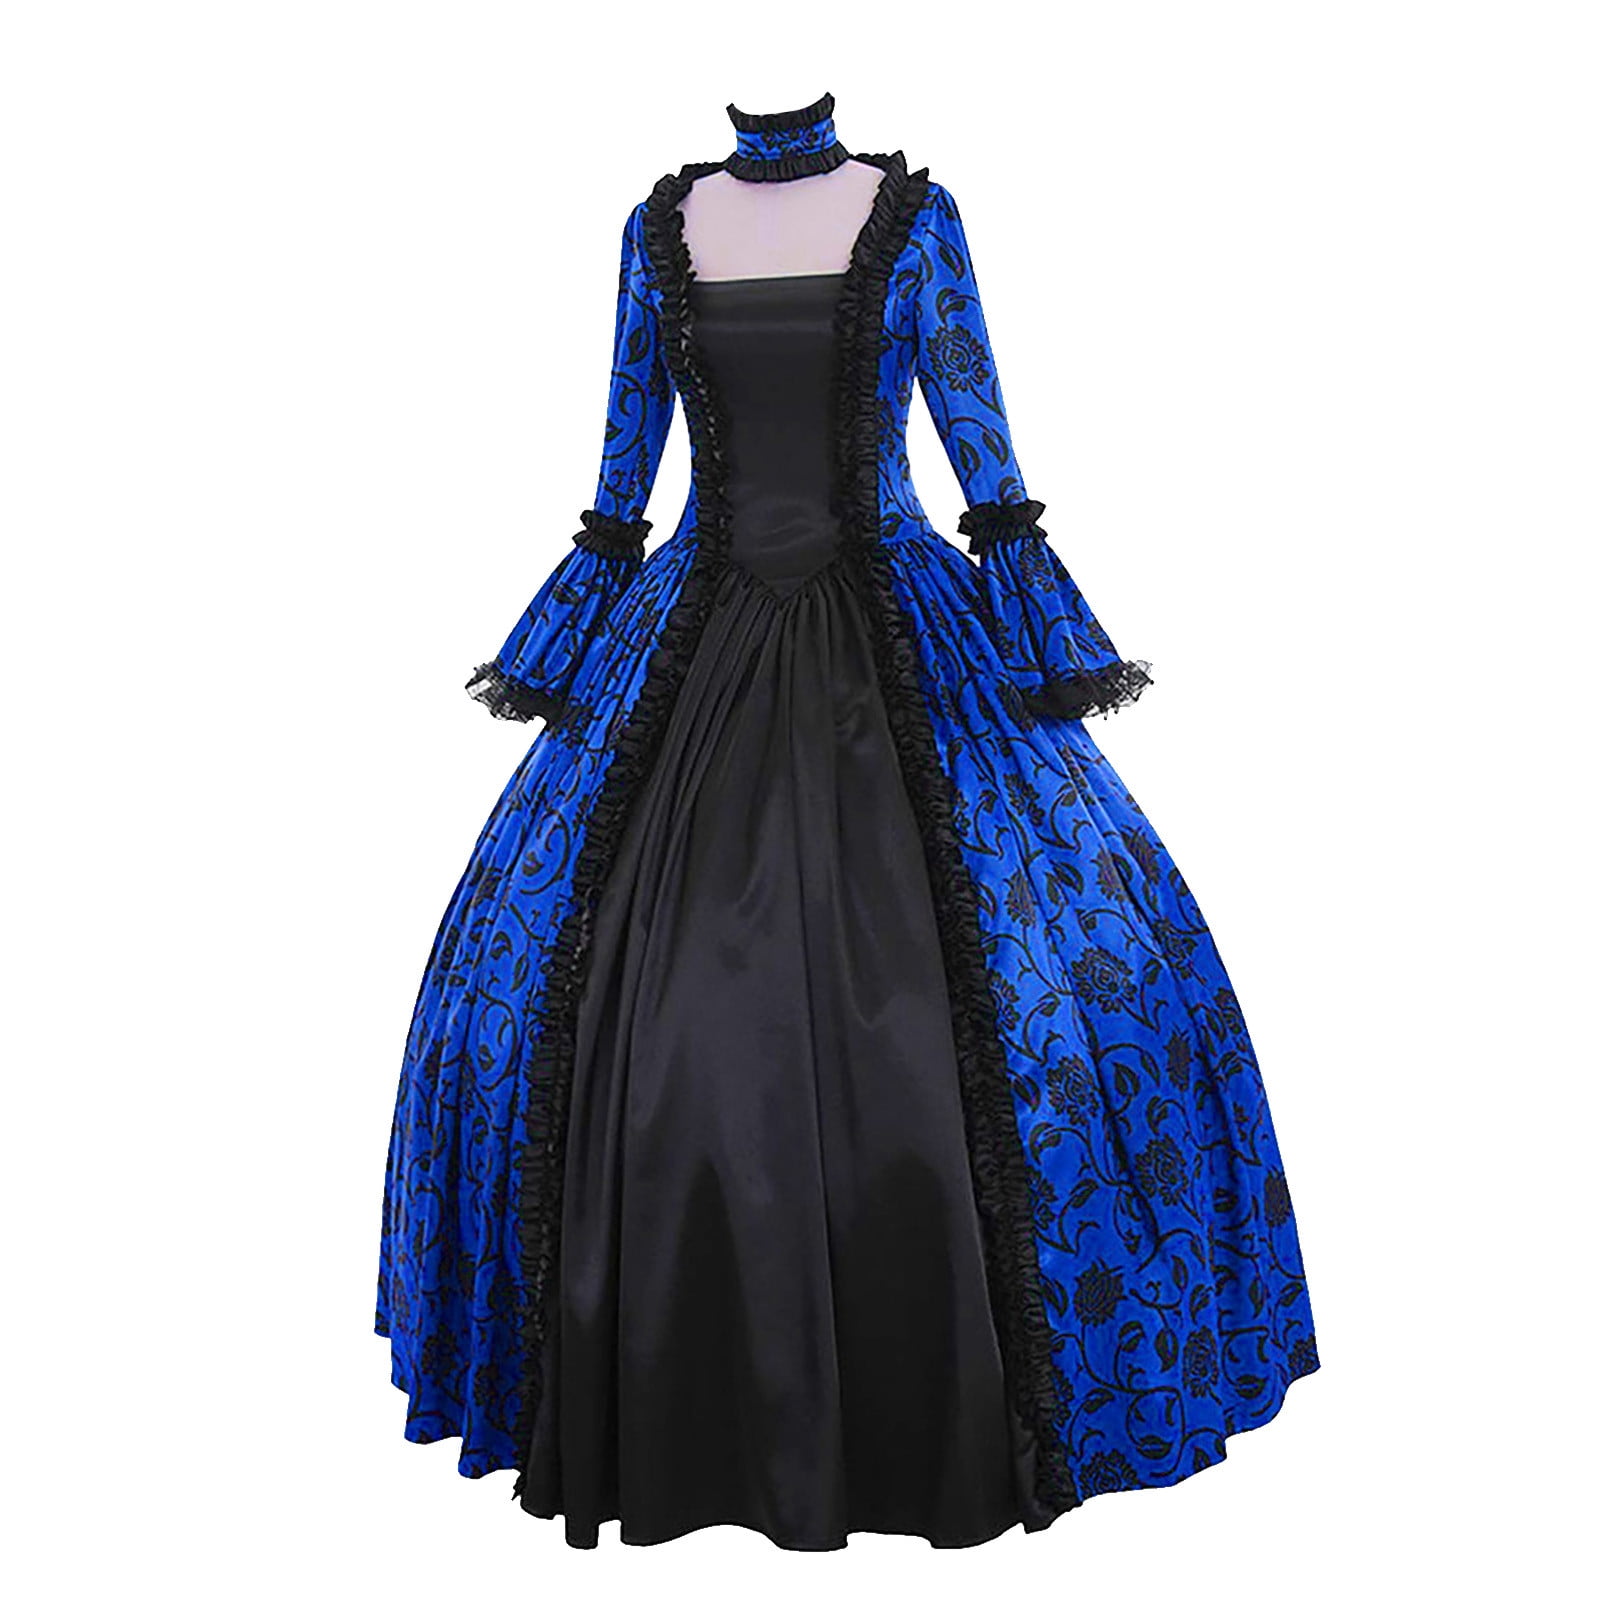 ZVAVZ Goth Clothes for Women, Victorian Dress for Women Medieval  Renaissance Costumes Retro Floral Panel Dress 1800s Dress Court Ball Gown  Cosplay - Lolita Dress for Women 